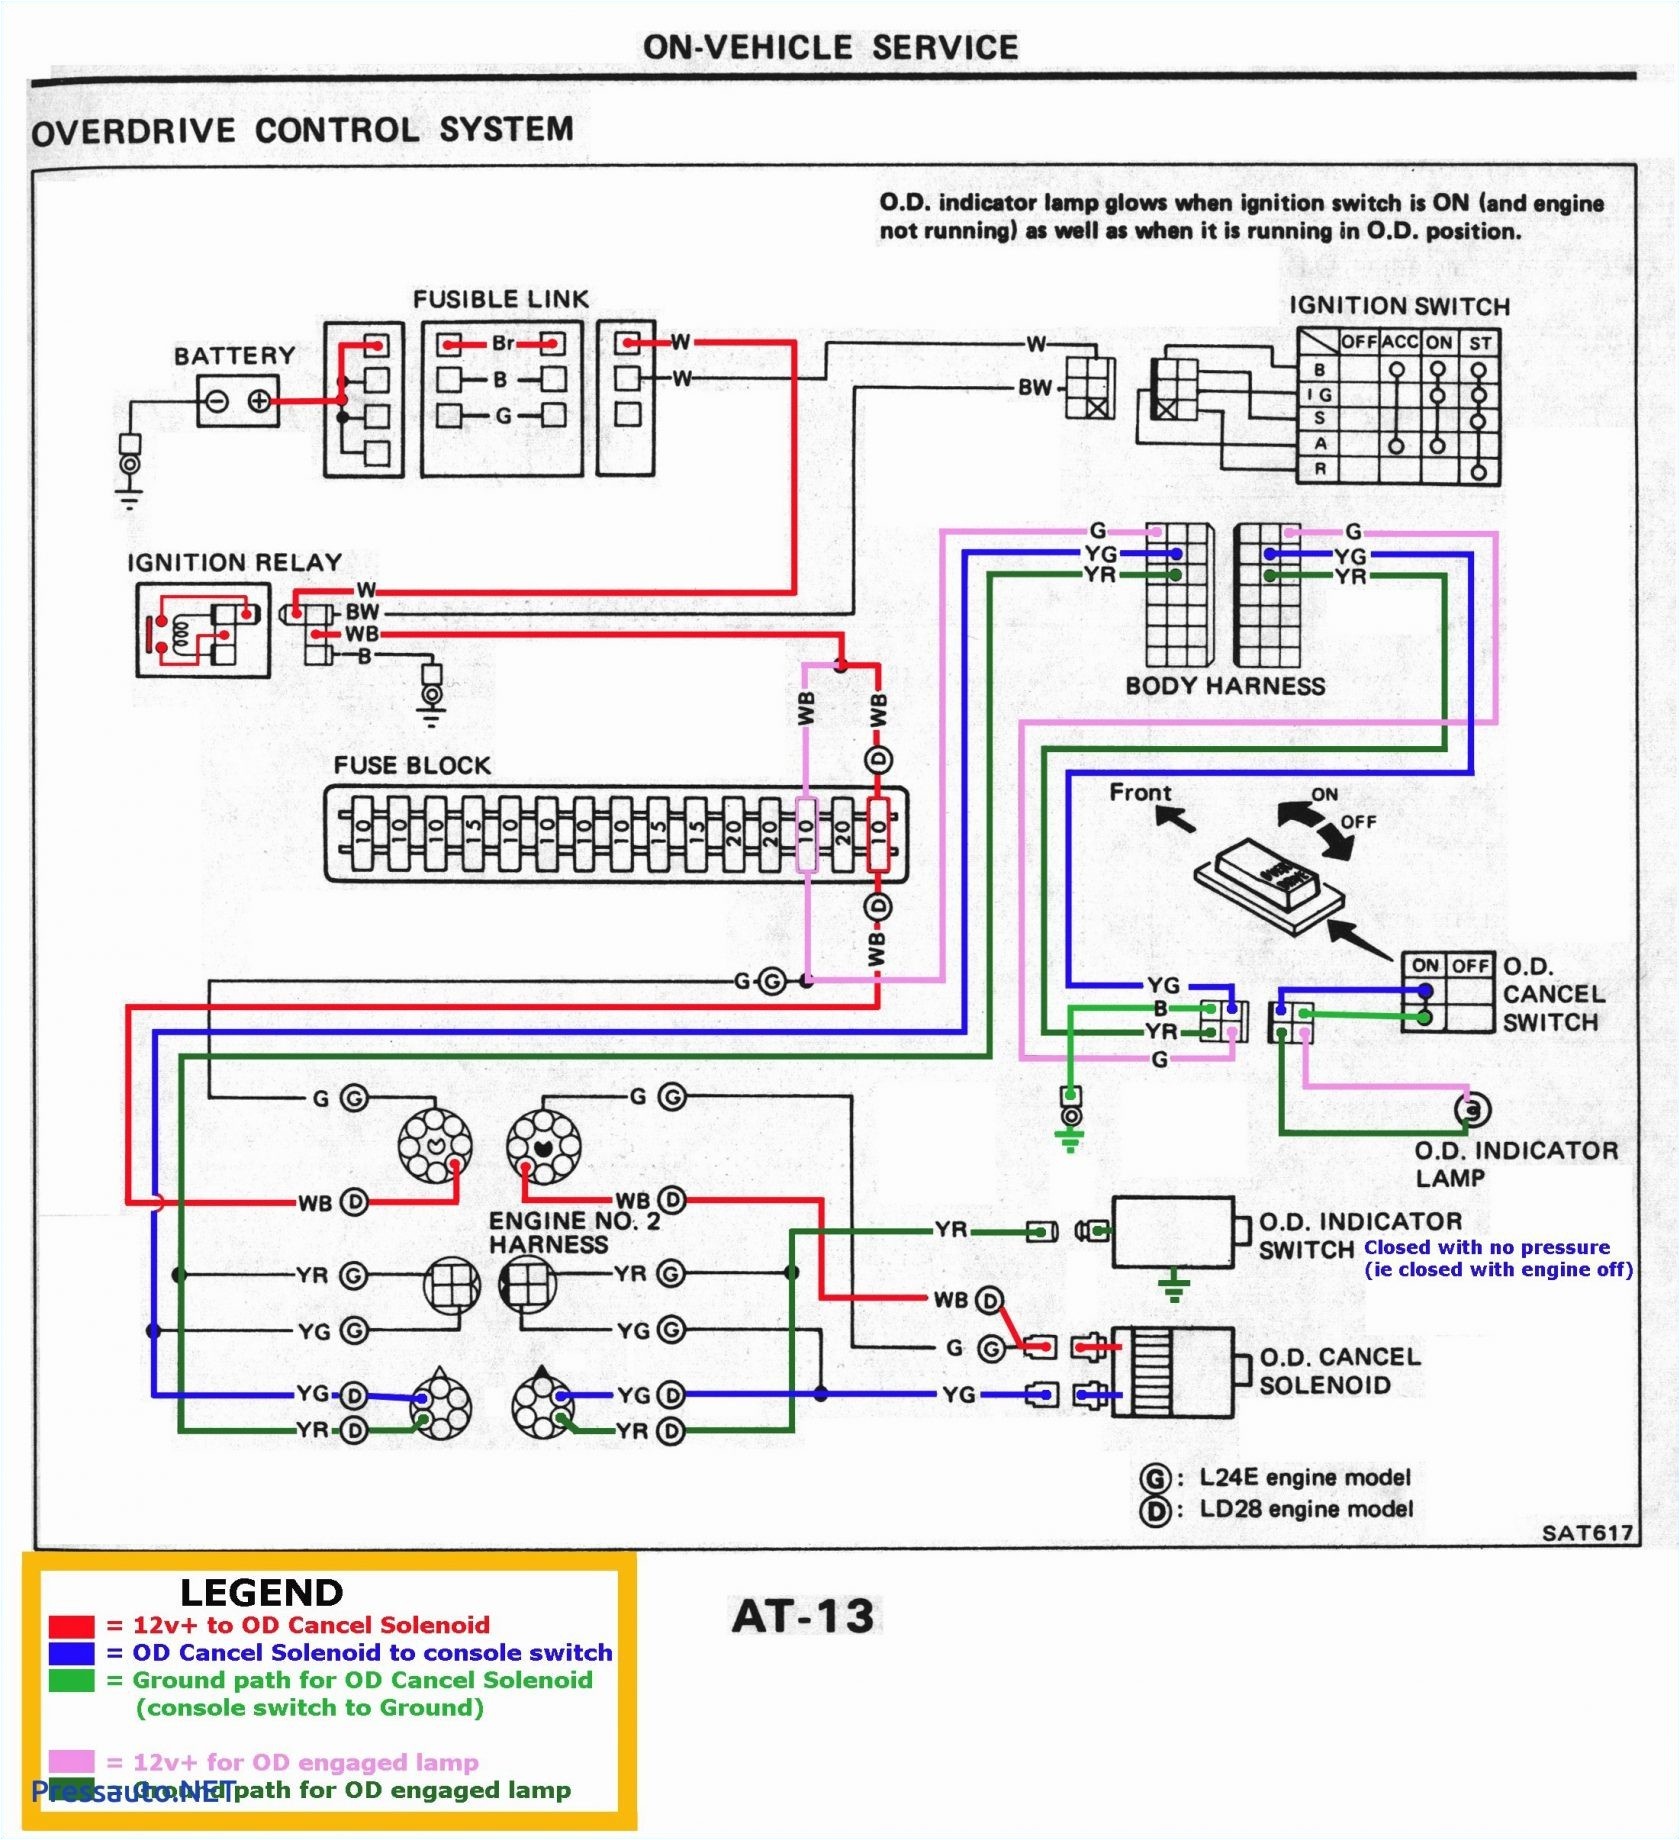 2014 Jeep Grand Cherokee Wiring Diagram Chevy Truck Trailer Wiring Color Code Poli Fuse17